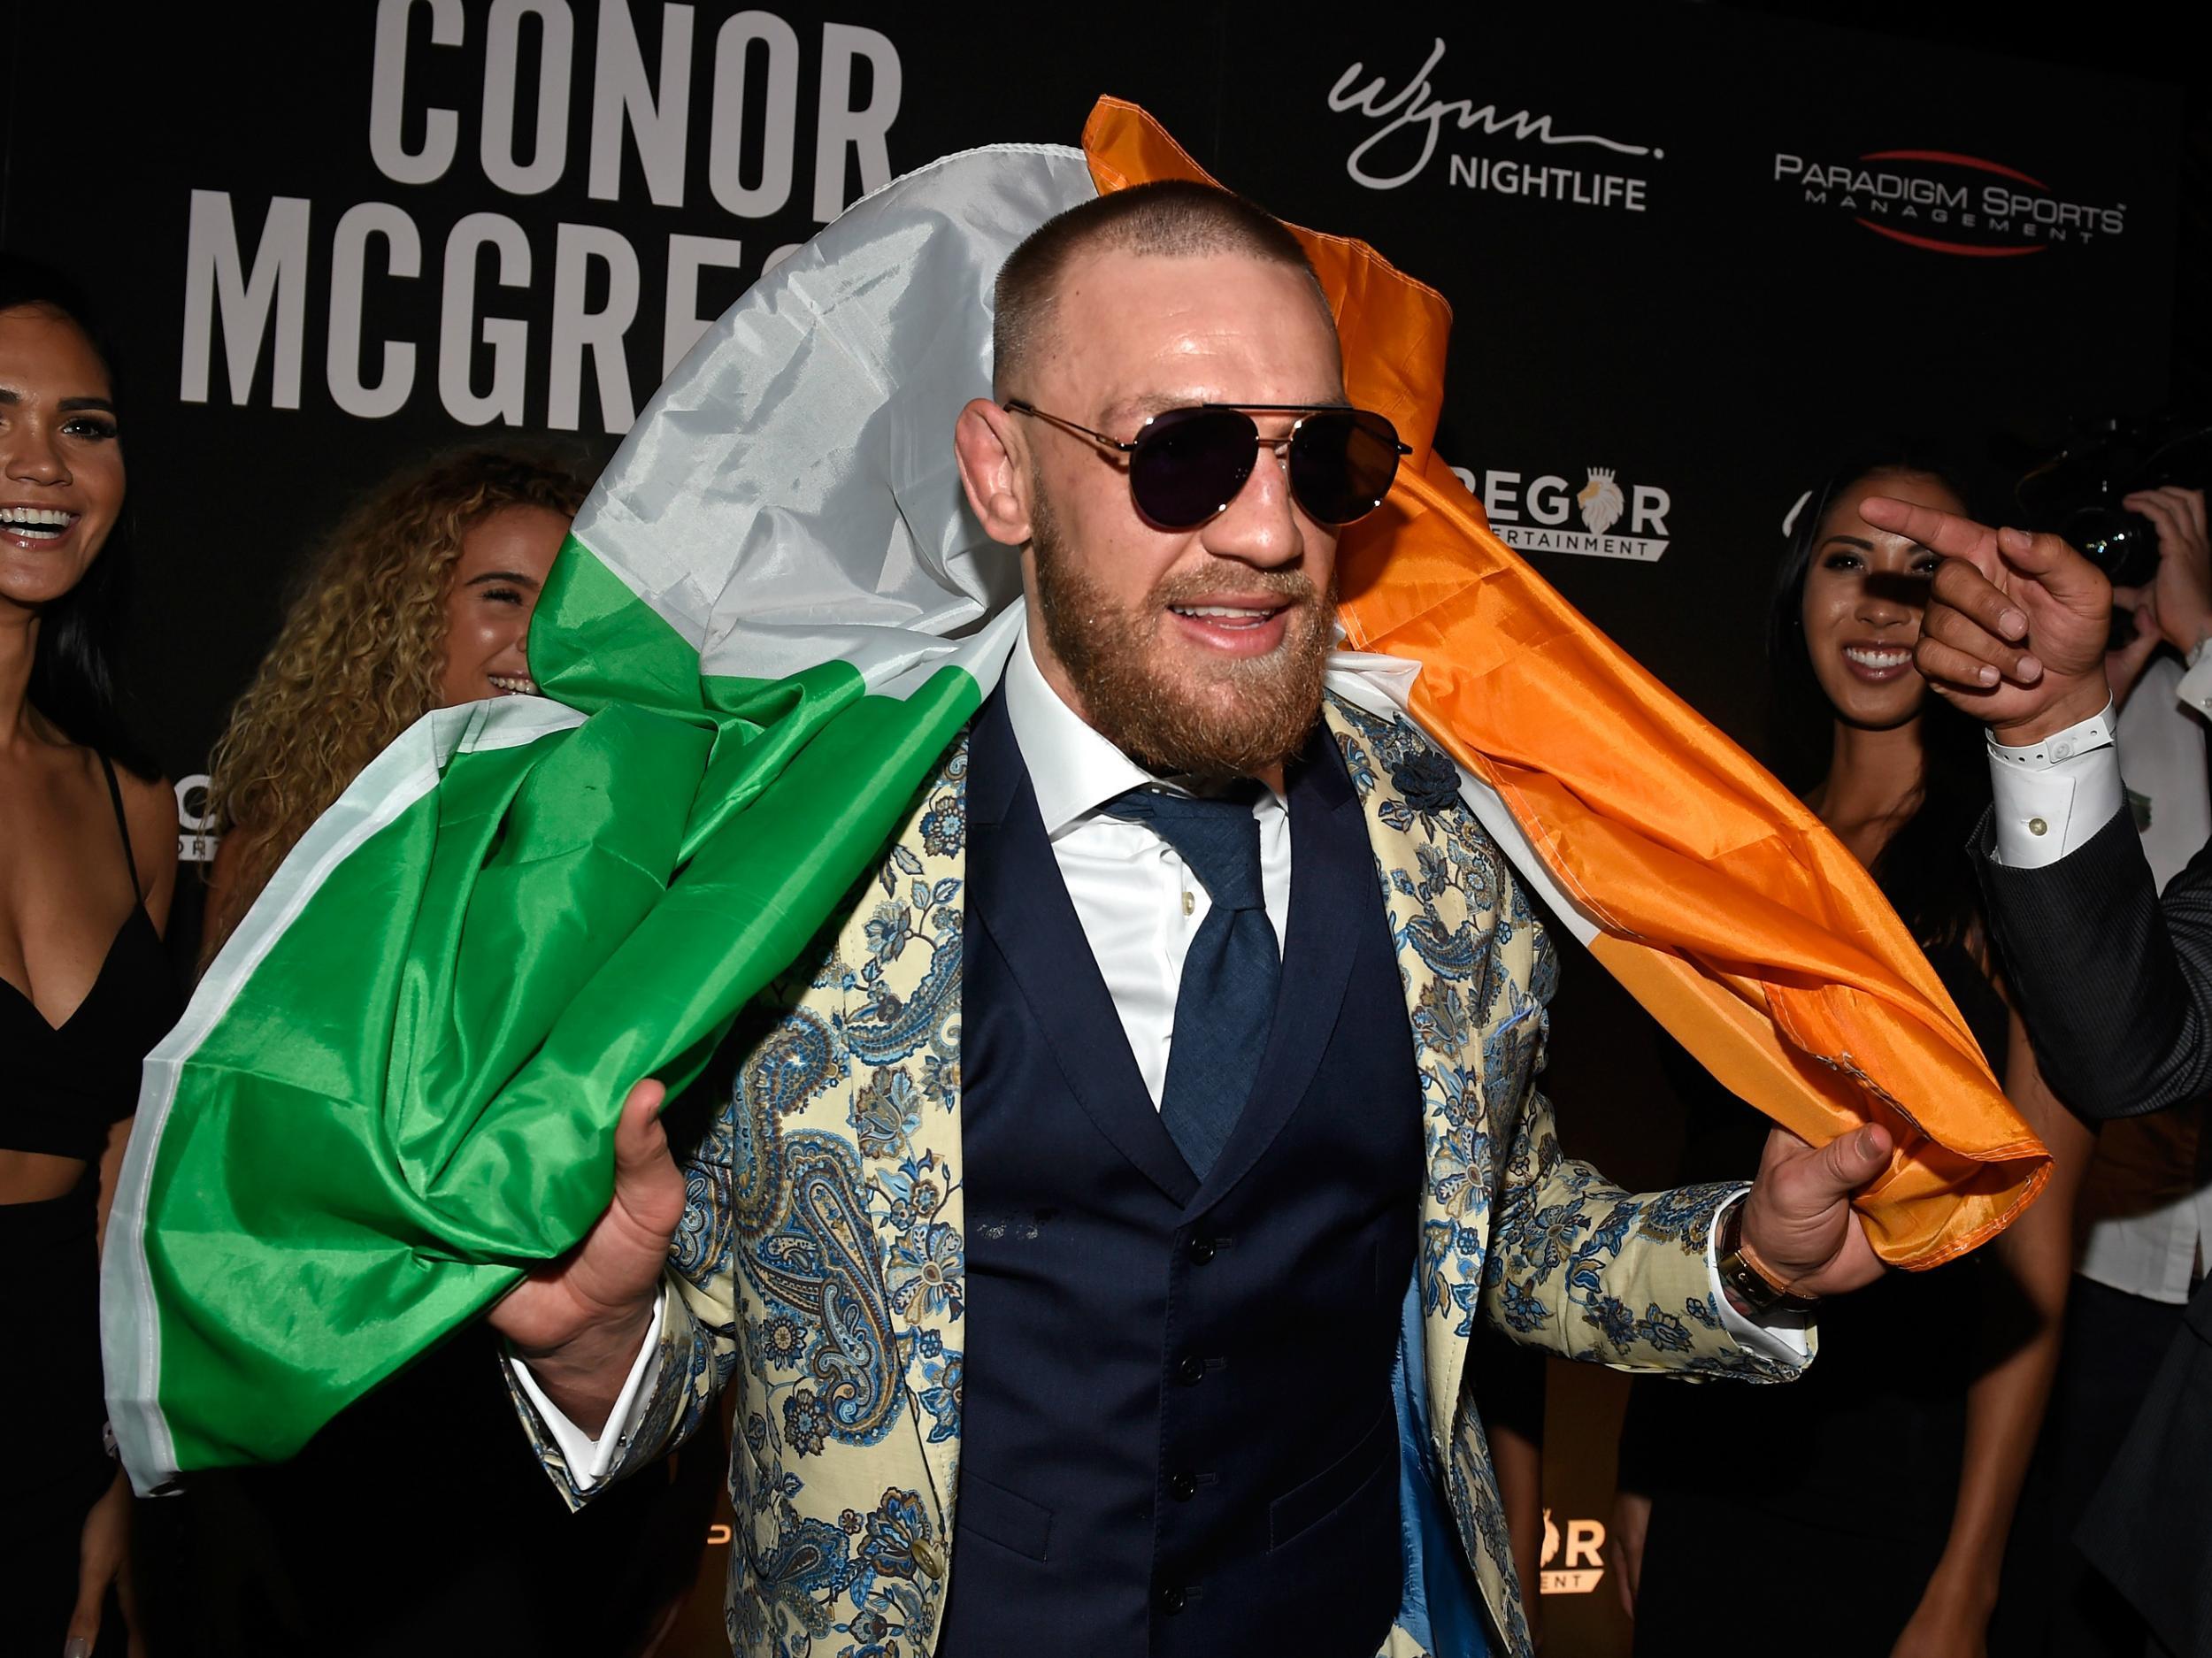 Conor McGregor has apologised for using the word f****t to describe a rival UFC fighter